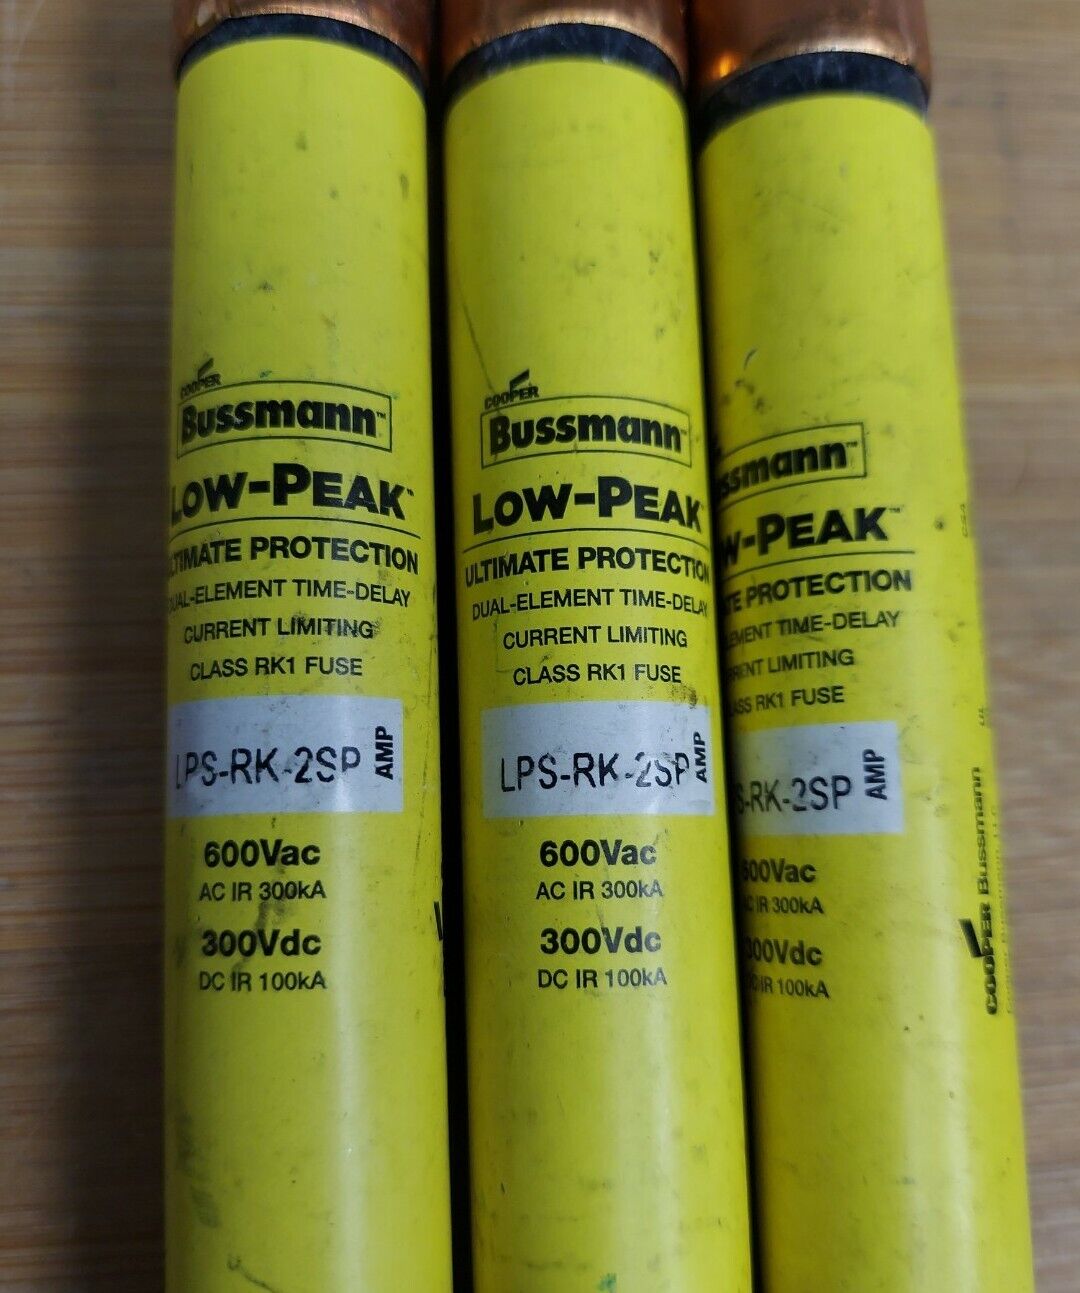 Bussmann LPS-RK-2SP 2A/AMP New Lot of 3 Fuses  (YE130) - 0